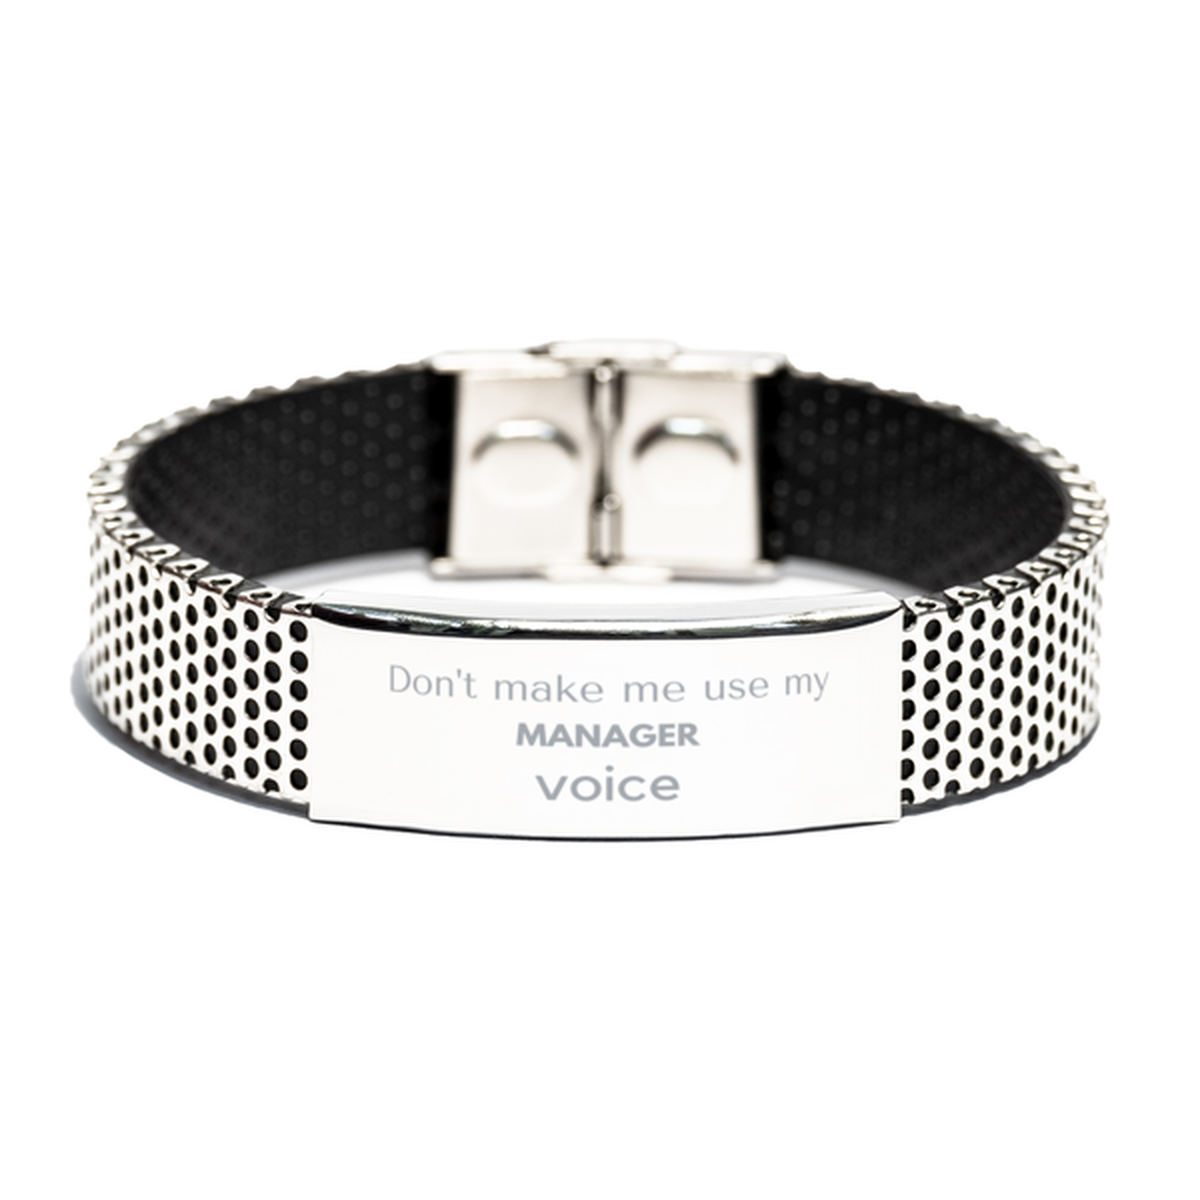 Don't make me use my Manager voice, Sarcasm Manager Gifts, Christmas Manager Stainless Steel Bracelet Birthday Unique Gifts For Manager Coworkers, Men, Women, Colleague, Friends